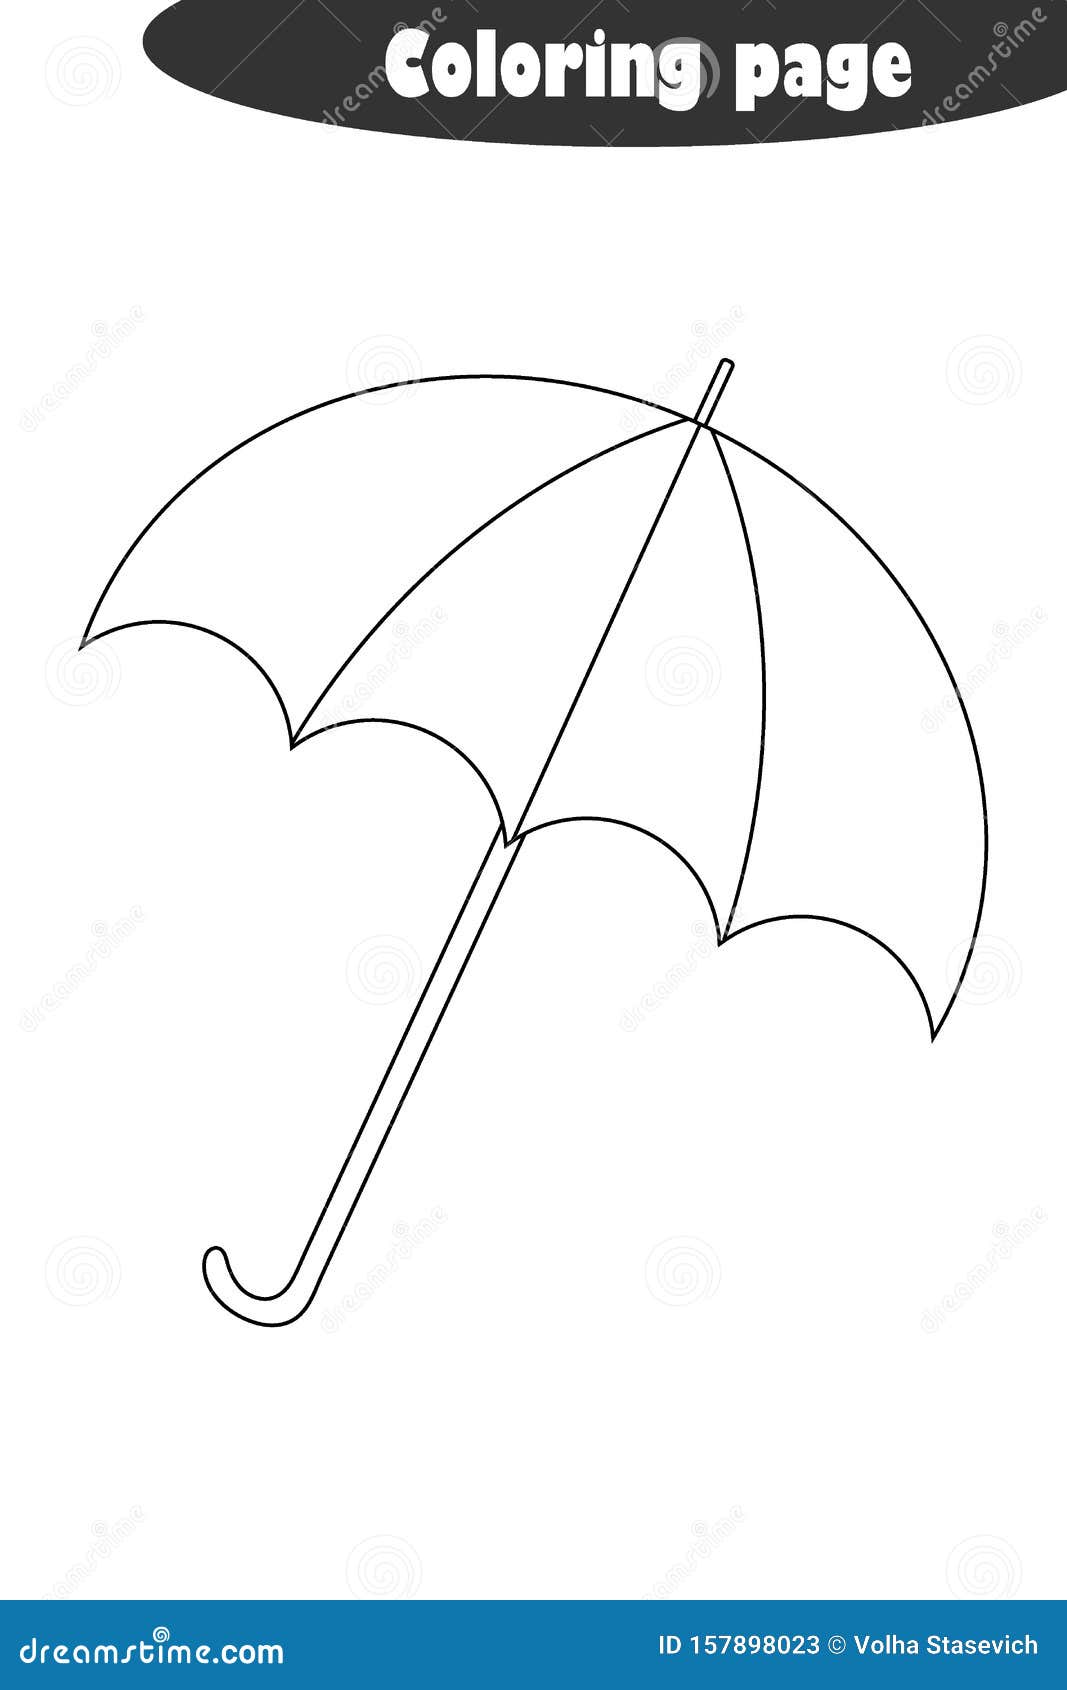 Umbrella in cartoon style autumn black white coloring page education paper game for the development of children kids preschool stock illustration